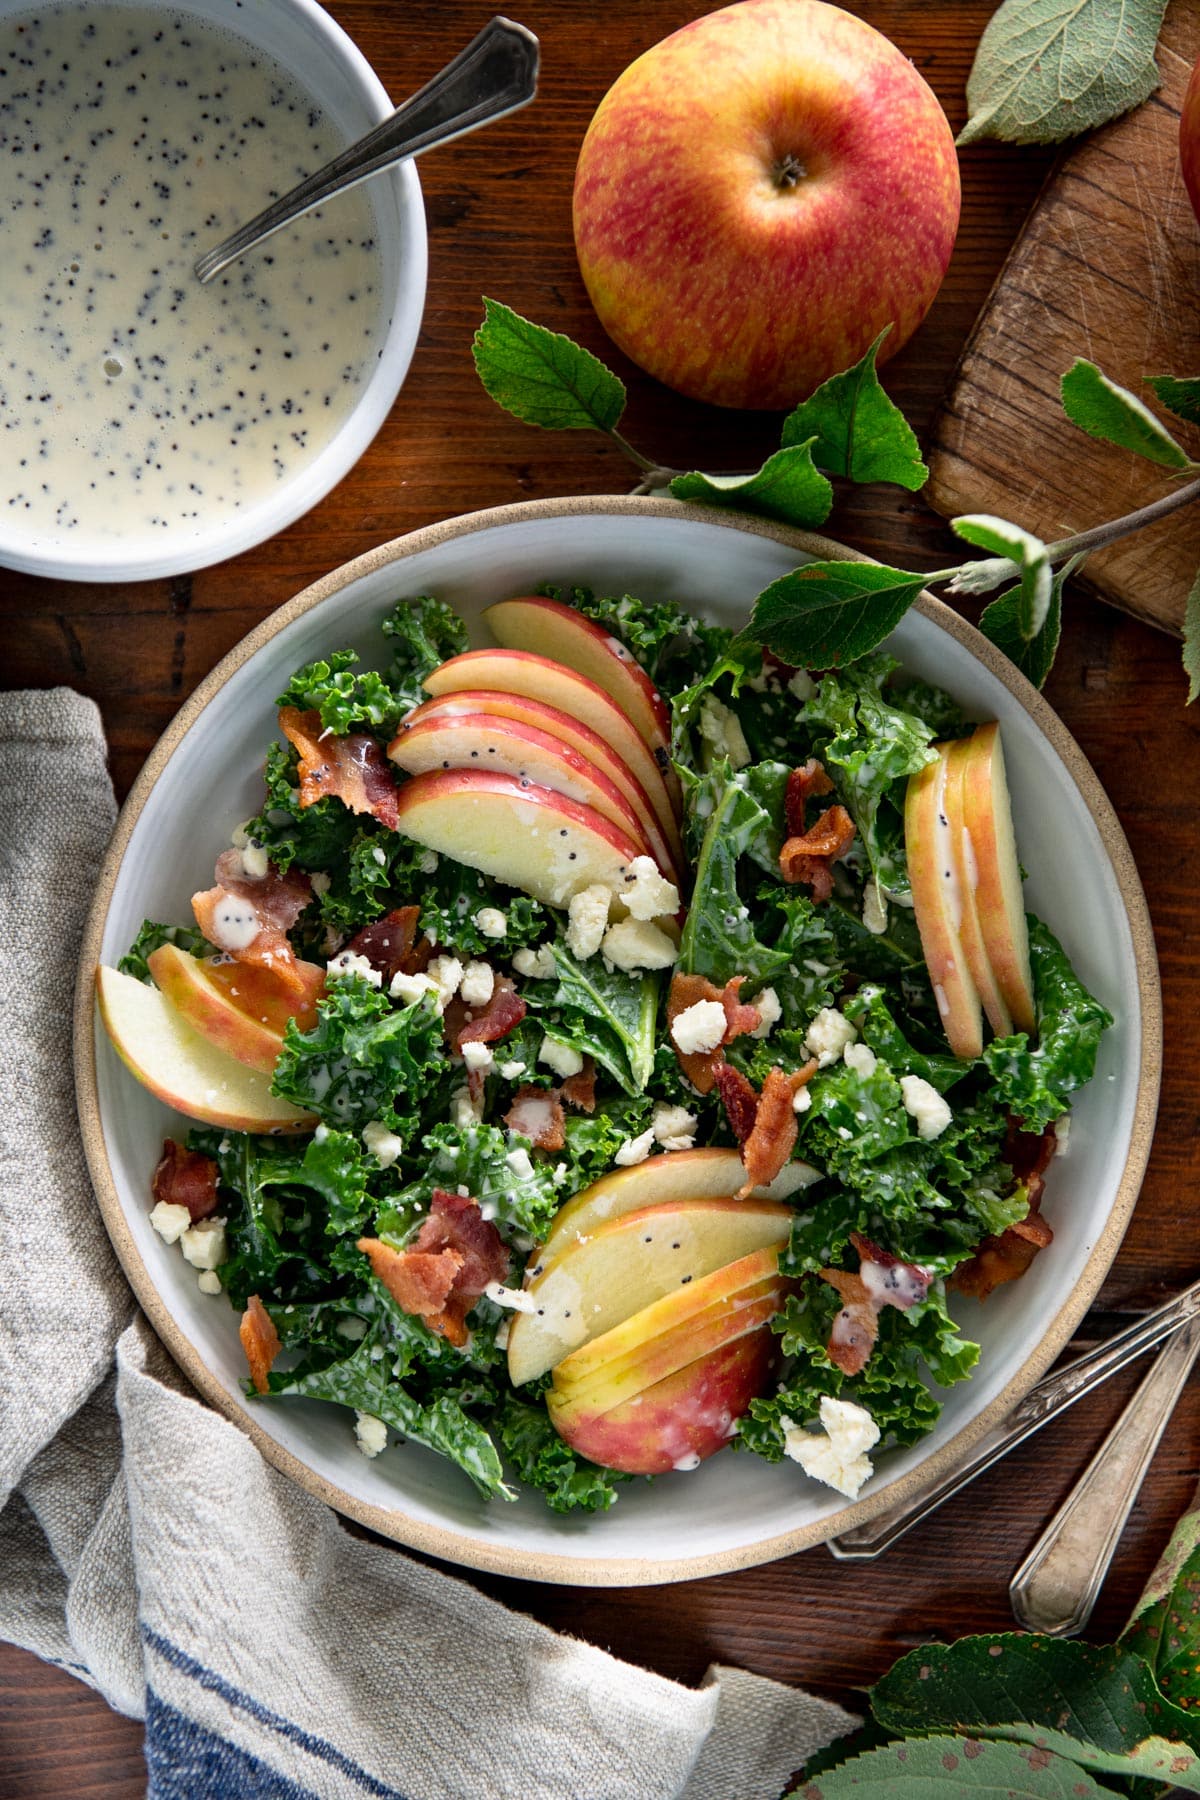 Bowl of apple kale salad on a wooden table.